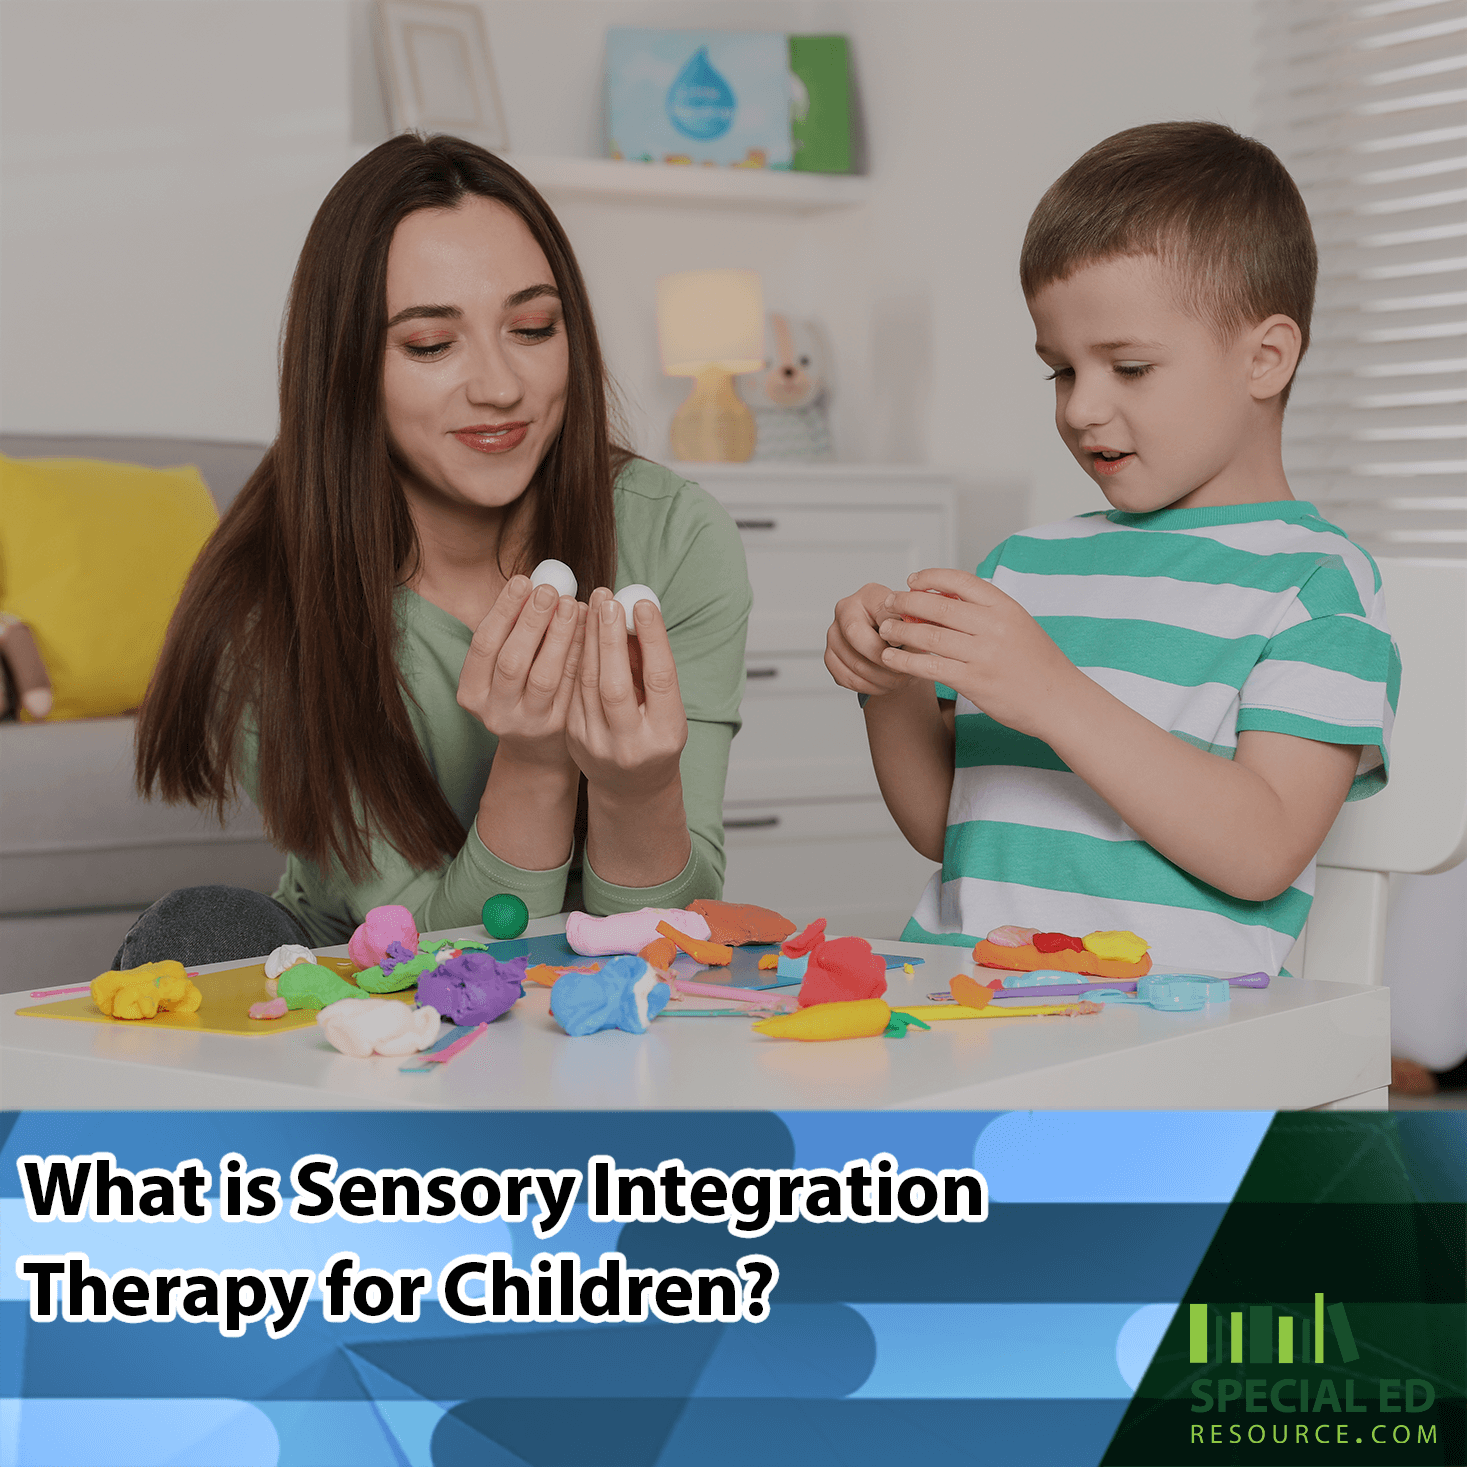 A woman and a young boy are sitting at a table covered with colorful modeling clay. The woman and boy are holding pieces of clay, engaging in a playful activity. The text on the image reads "What is Sensory Integration Therapy for Children?" with a logo for Special Ed Resource in the bottom right corner.